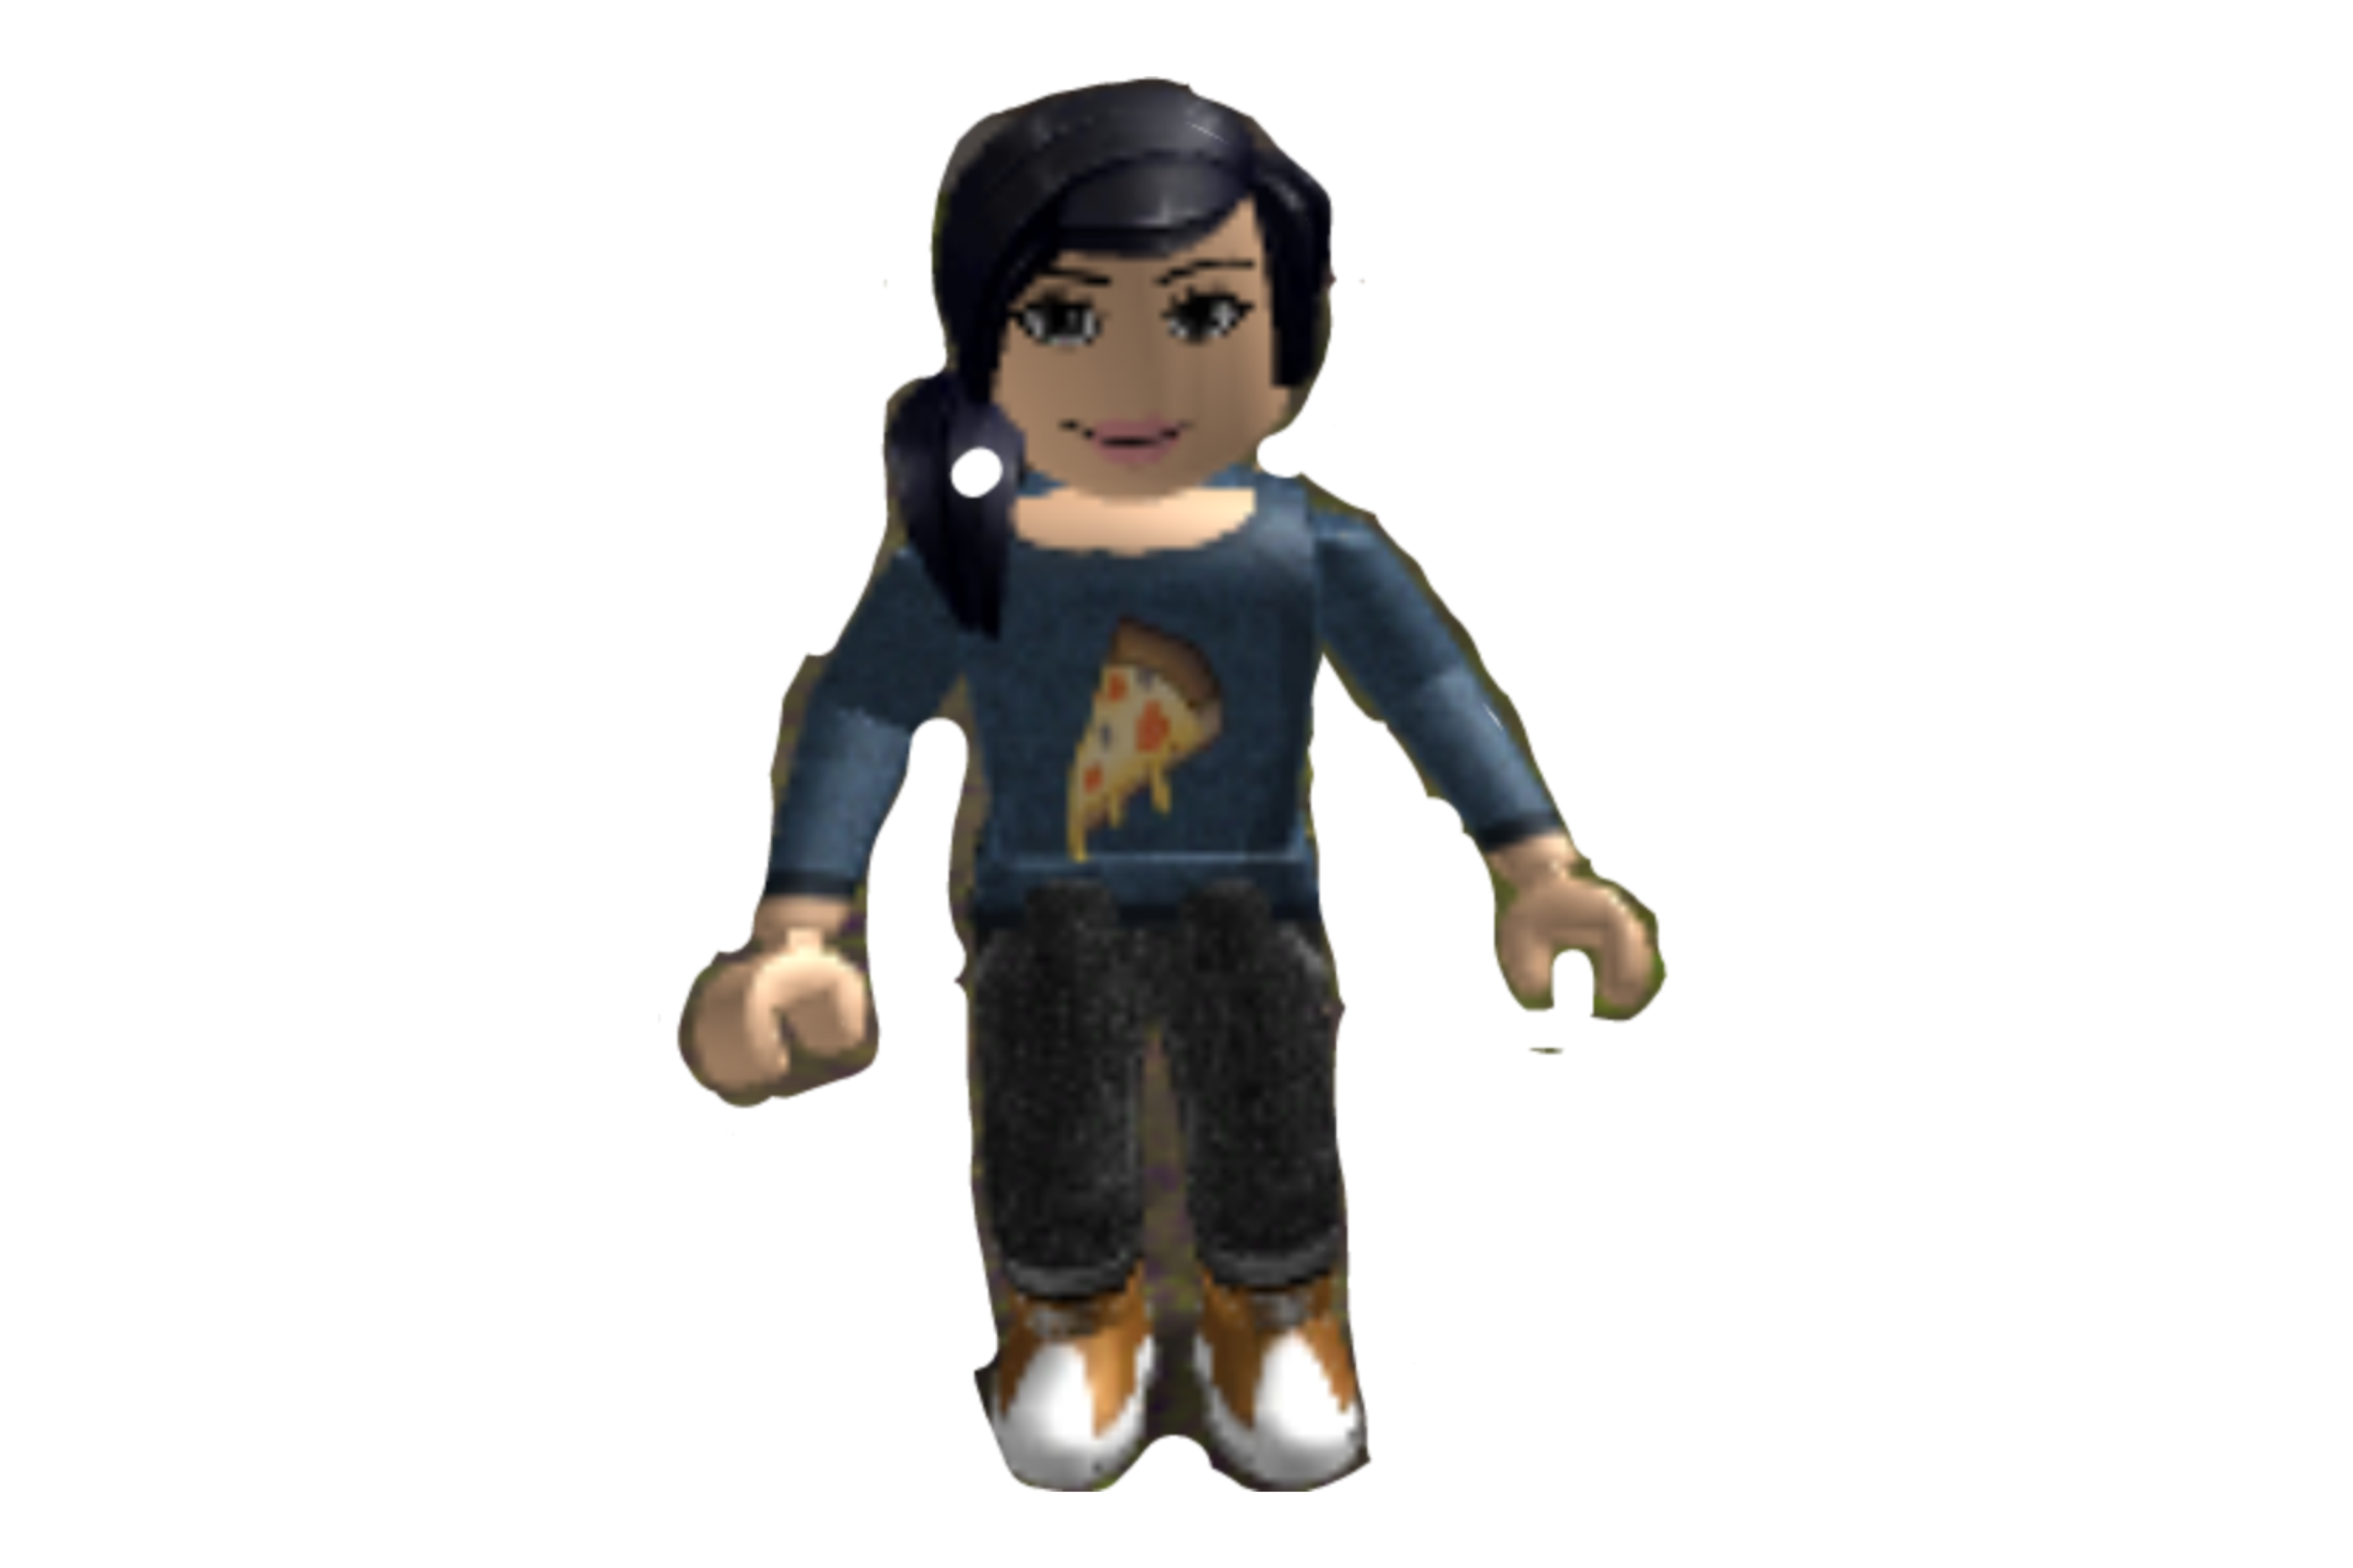 This Is My Roblox Character My Username Is Cesca0413 - my username is this roblox